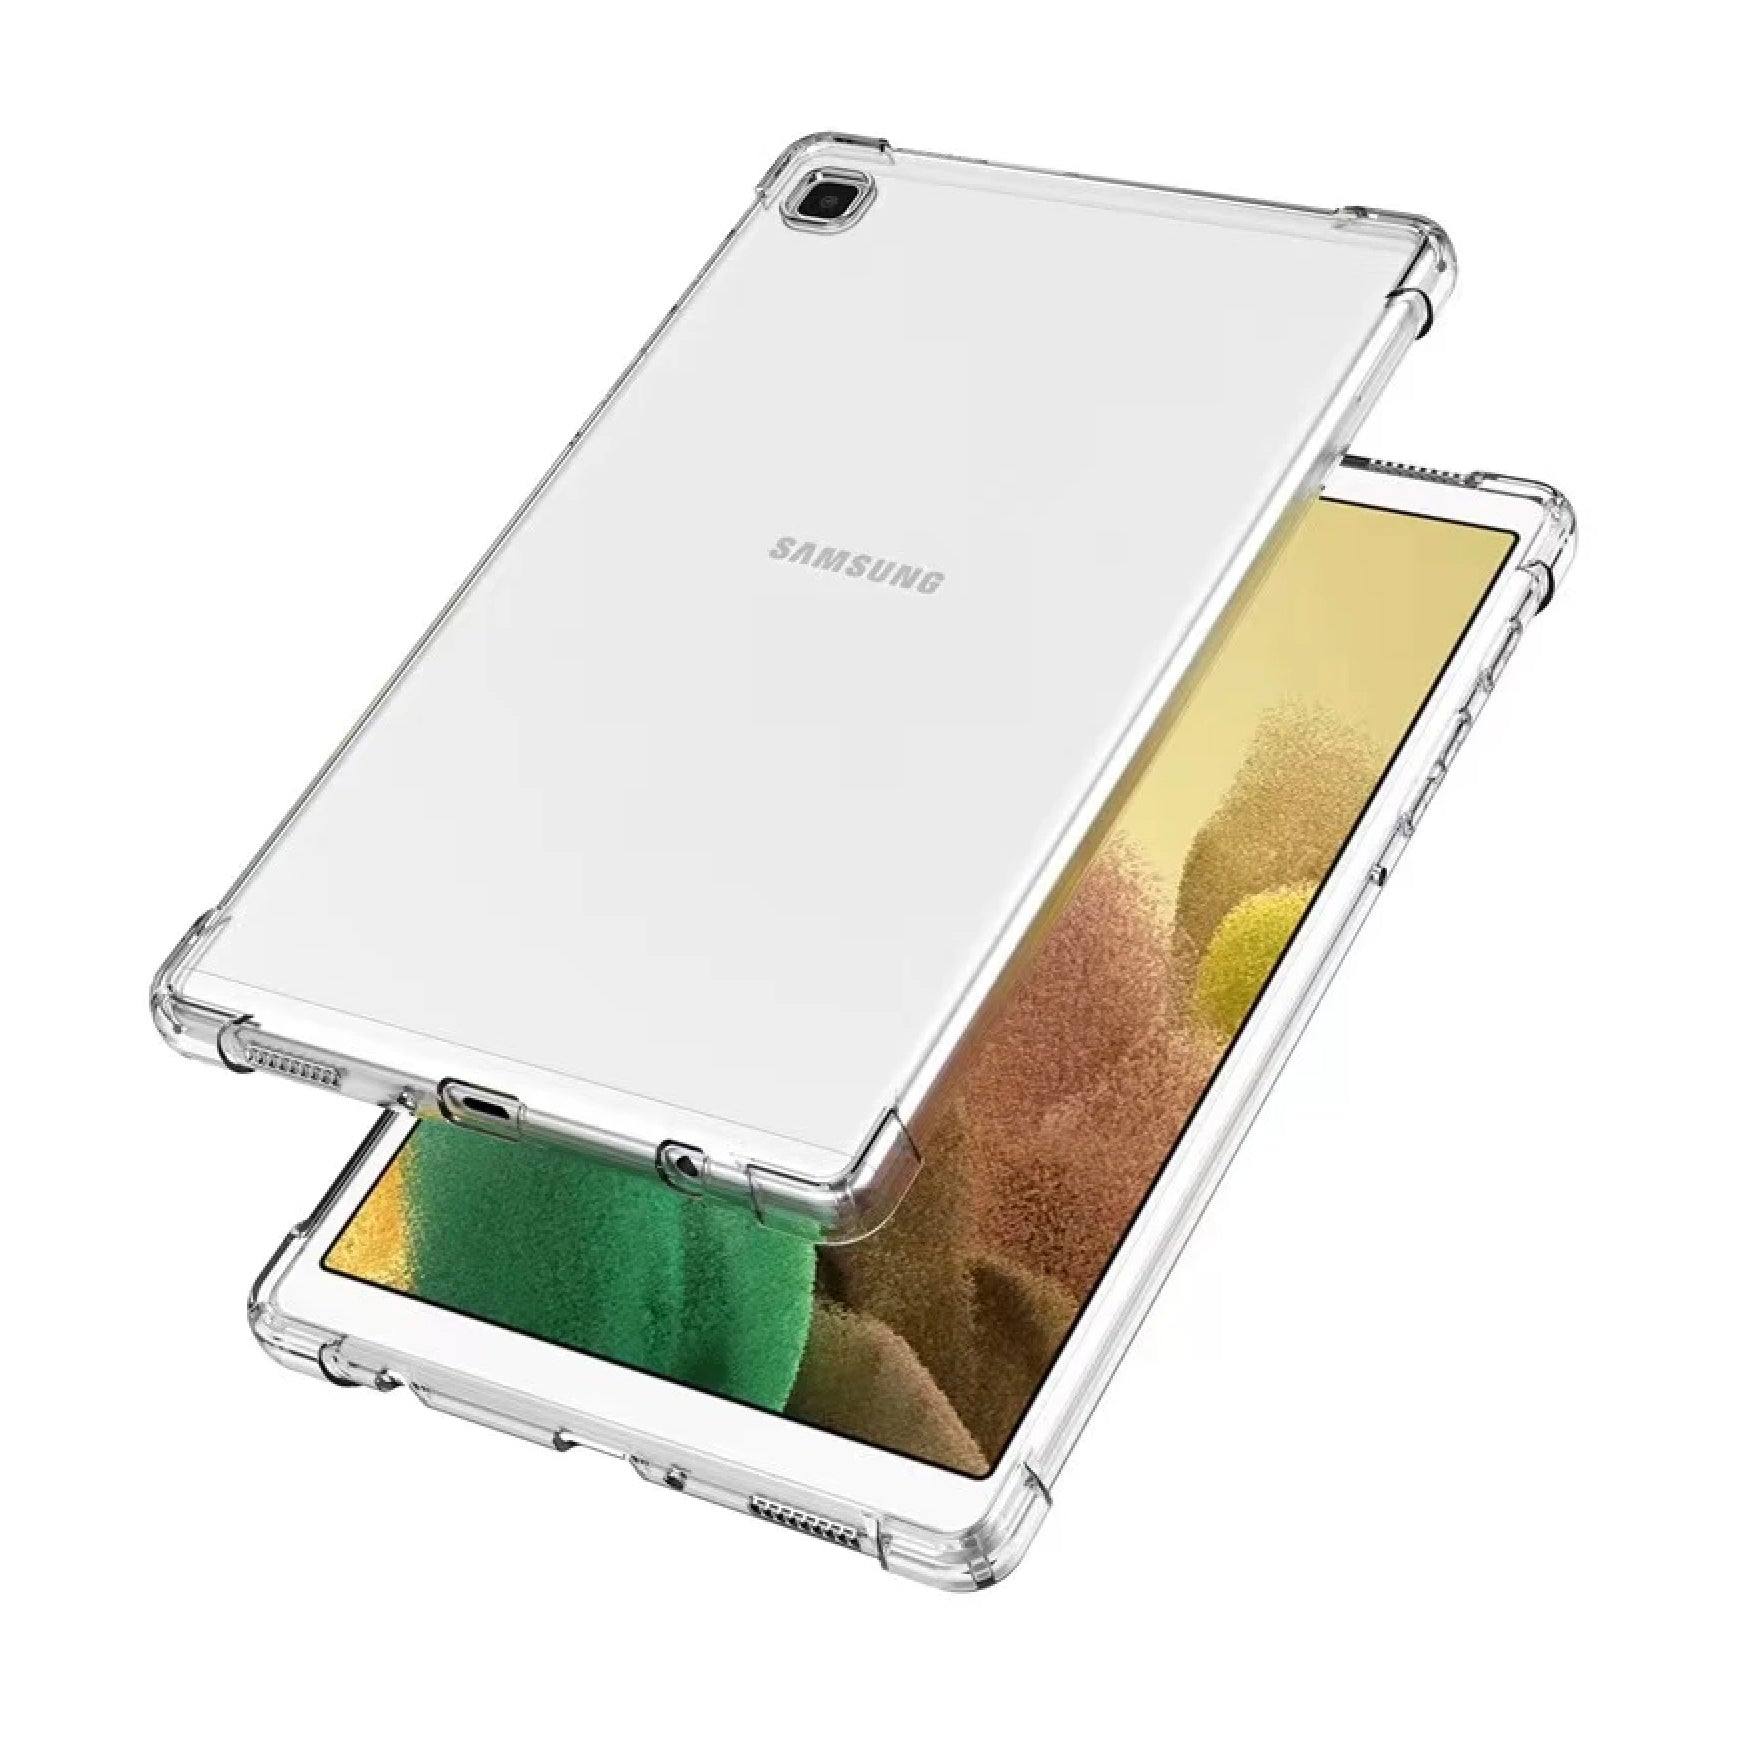 Clear Soft TPU Cover For Samsung Galaxy Tab A7 Lite ShockProof Bumper Case-www.firsthelptech.ie